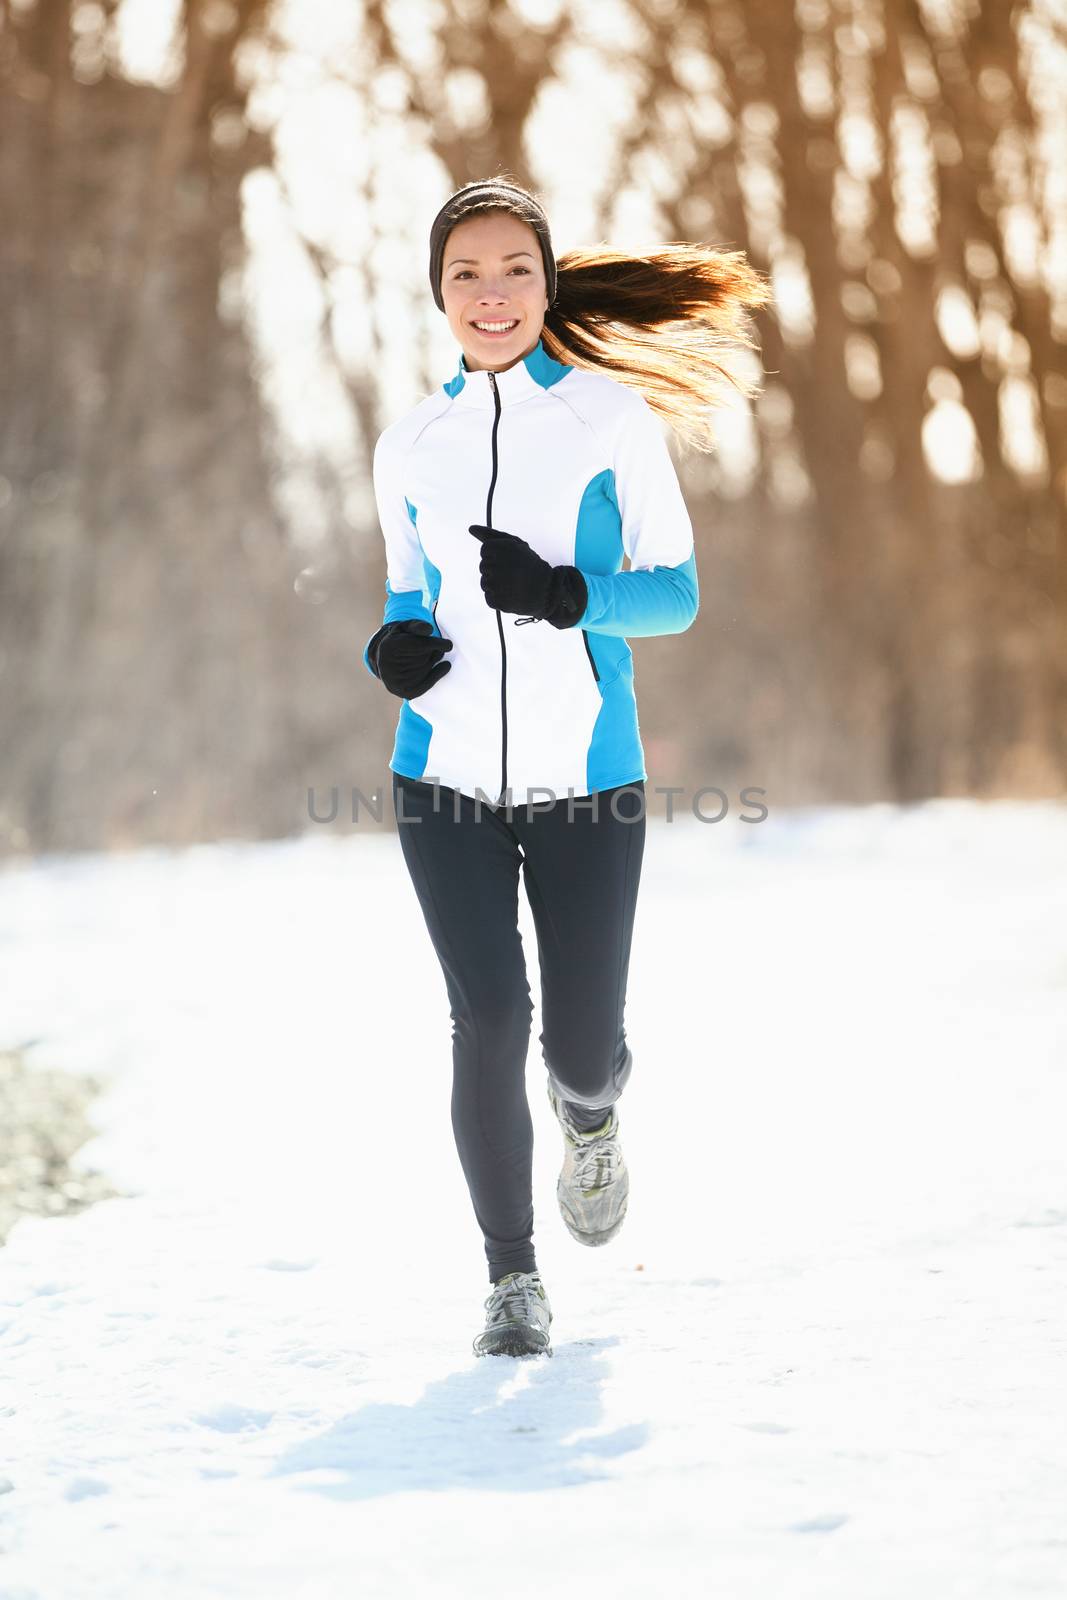 Winter running. Woman runner trail running cold winter forest landscape. Mixed race Asian / Caucasian female cross country running in warm clothes